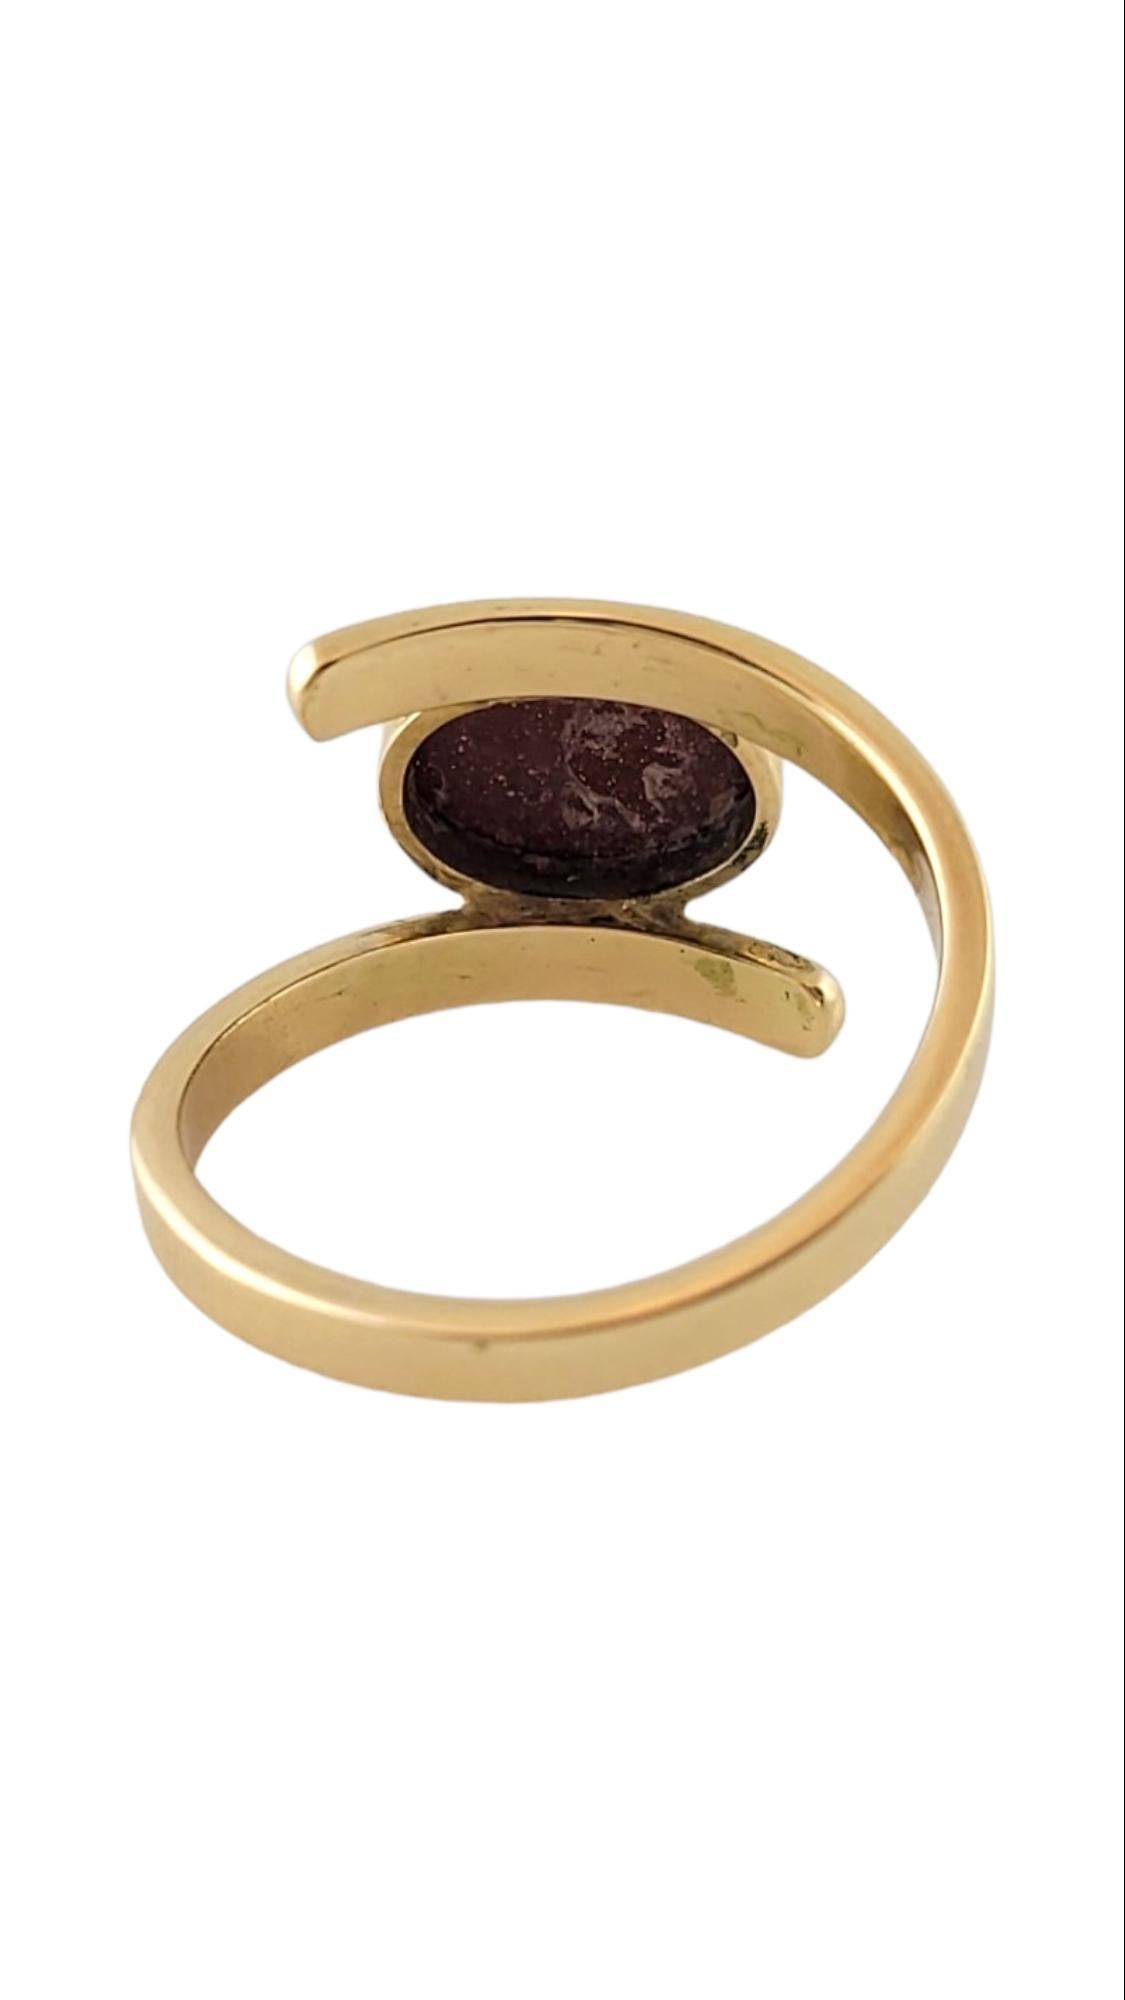 Women's 14K Yellow Gold Gold Stone Ring Size 5.5 #15196 For Sale